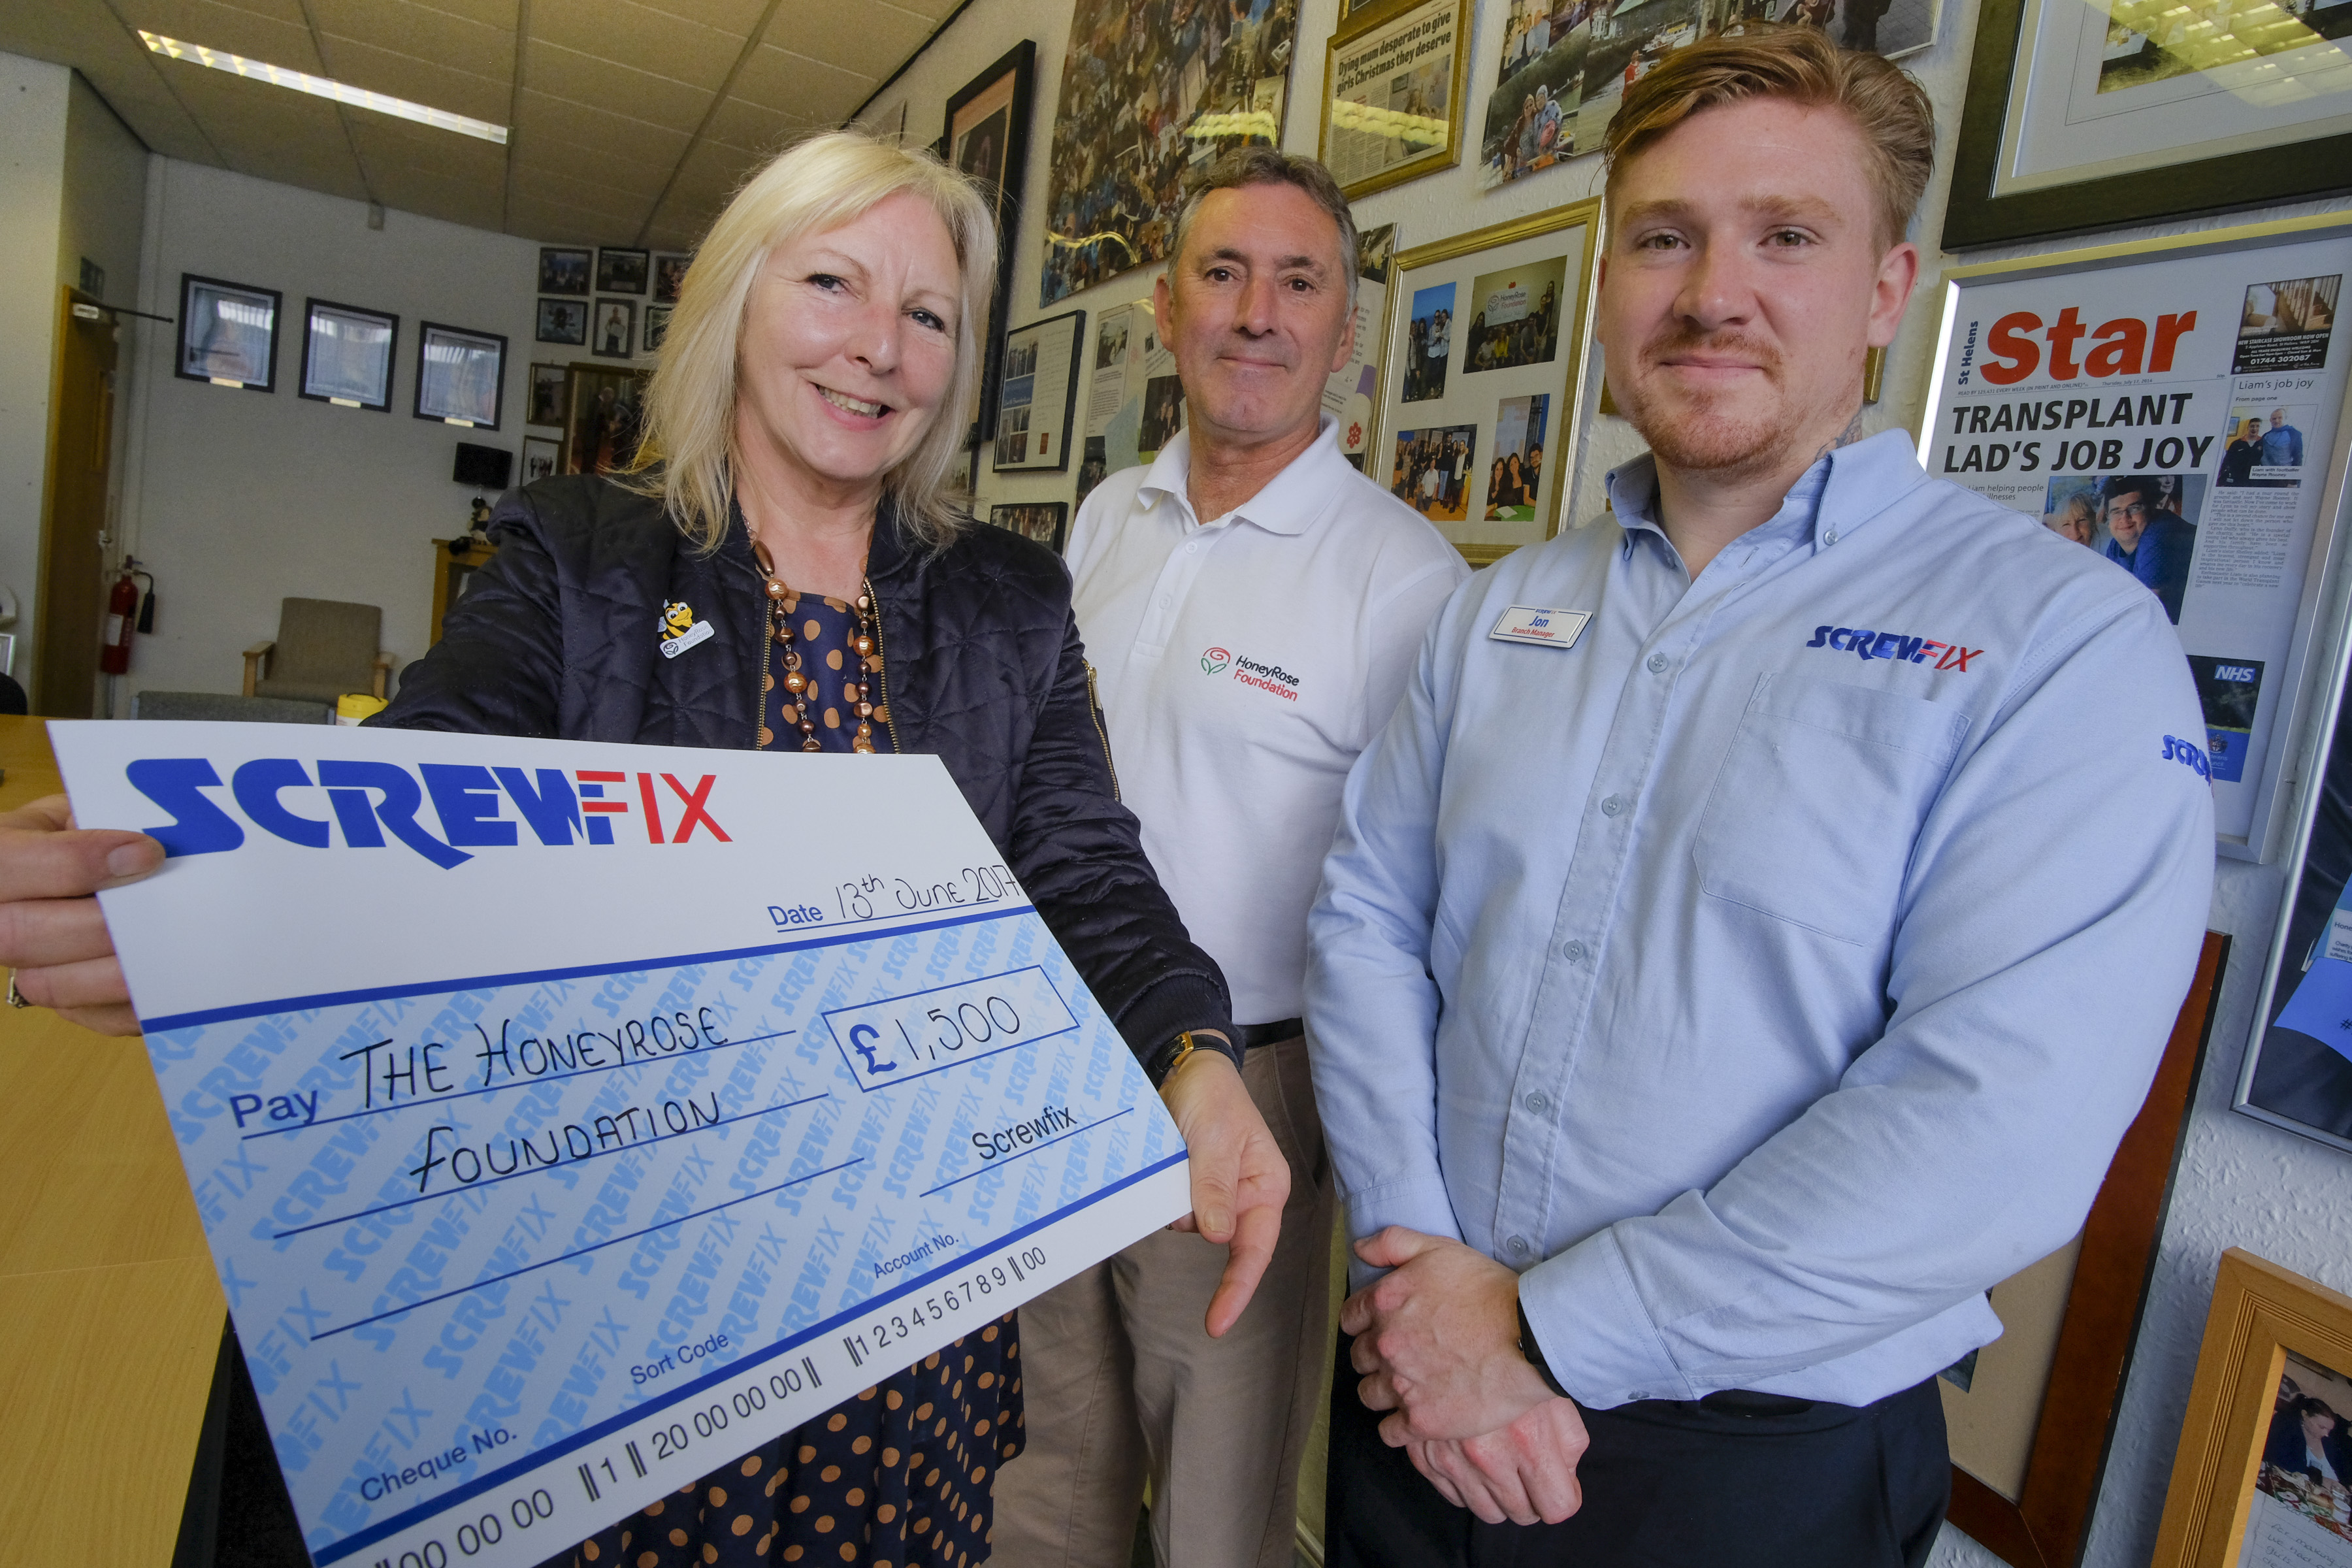 The Honeyrose Foundation gets a helping hand from the Screwfix Foundation